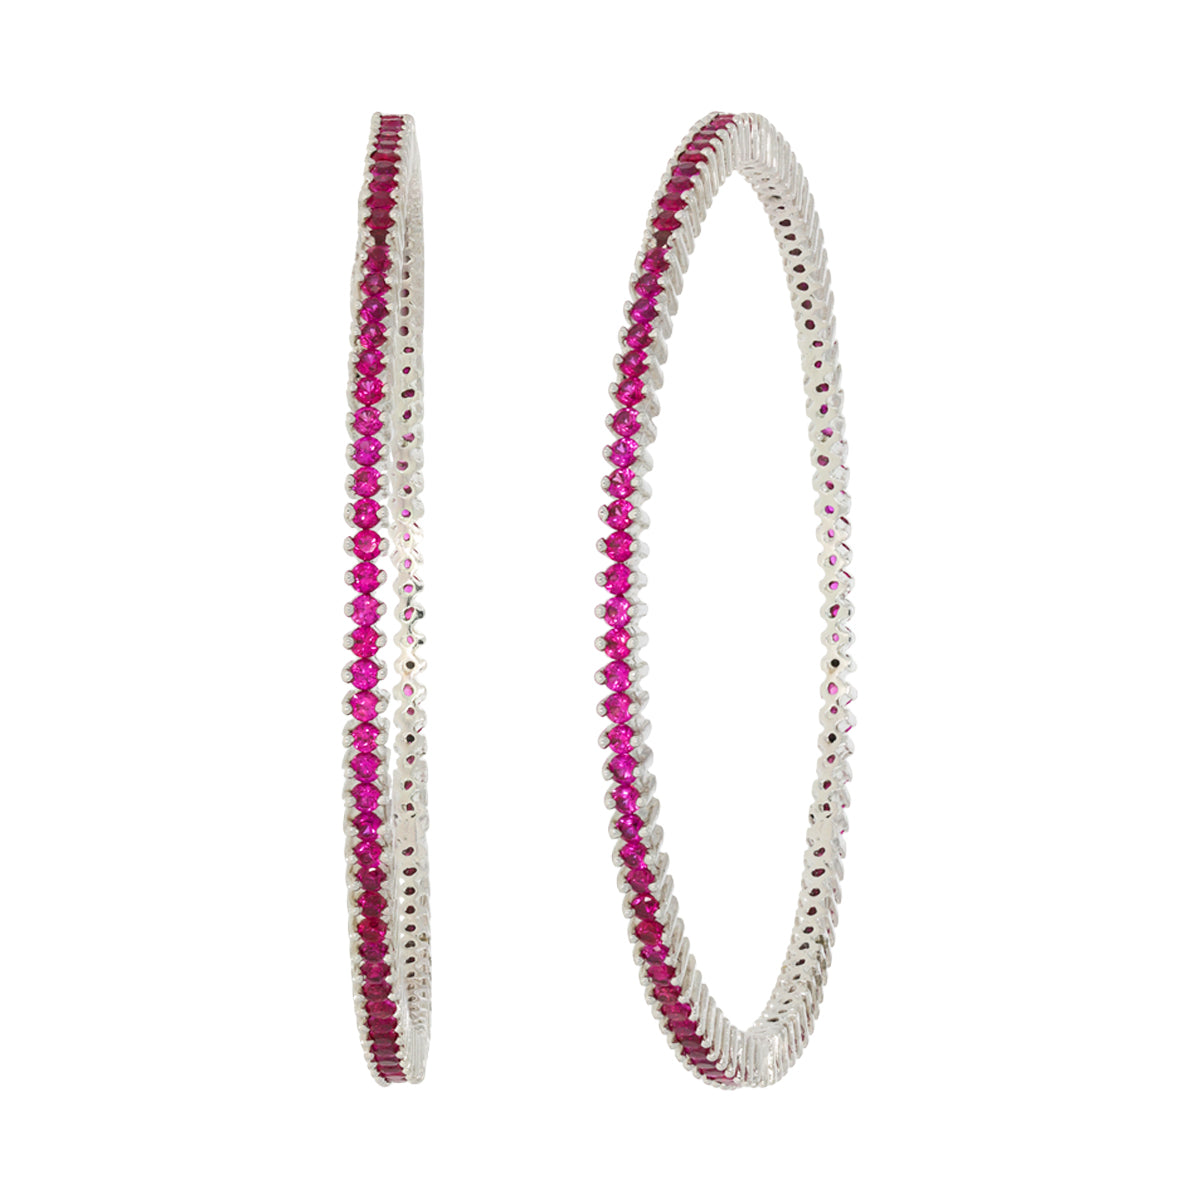 The Blossom Pink Bangles